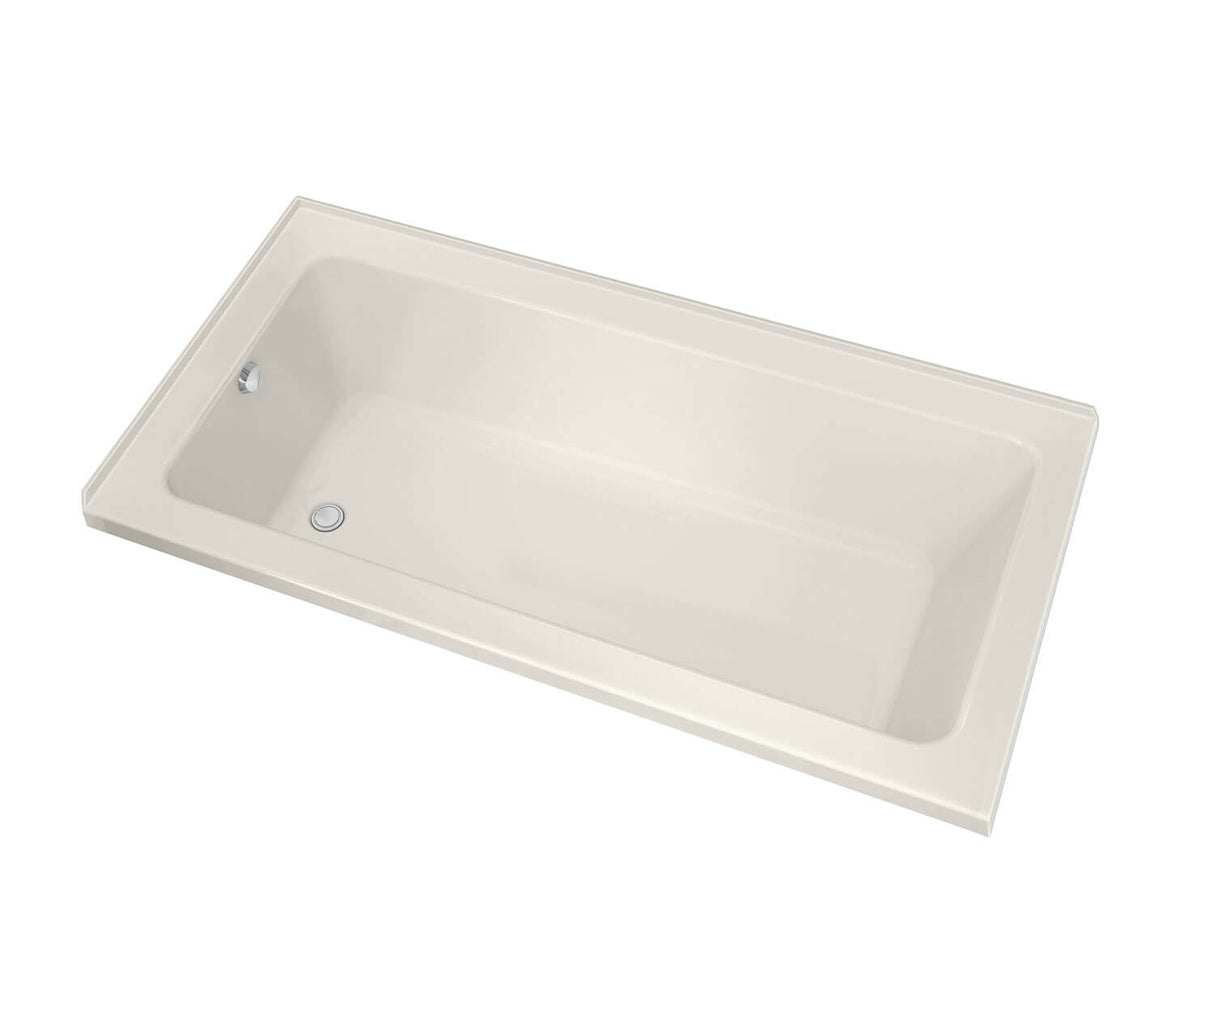 MAAX 106202-R-003-007 Pose 6032 IF Acrylic Corner Left Right-Hand Drain Whirlpool Bathtub in Biscuit